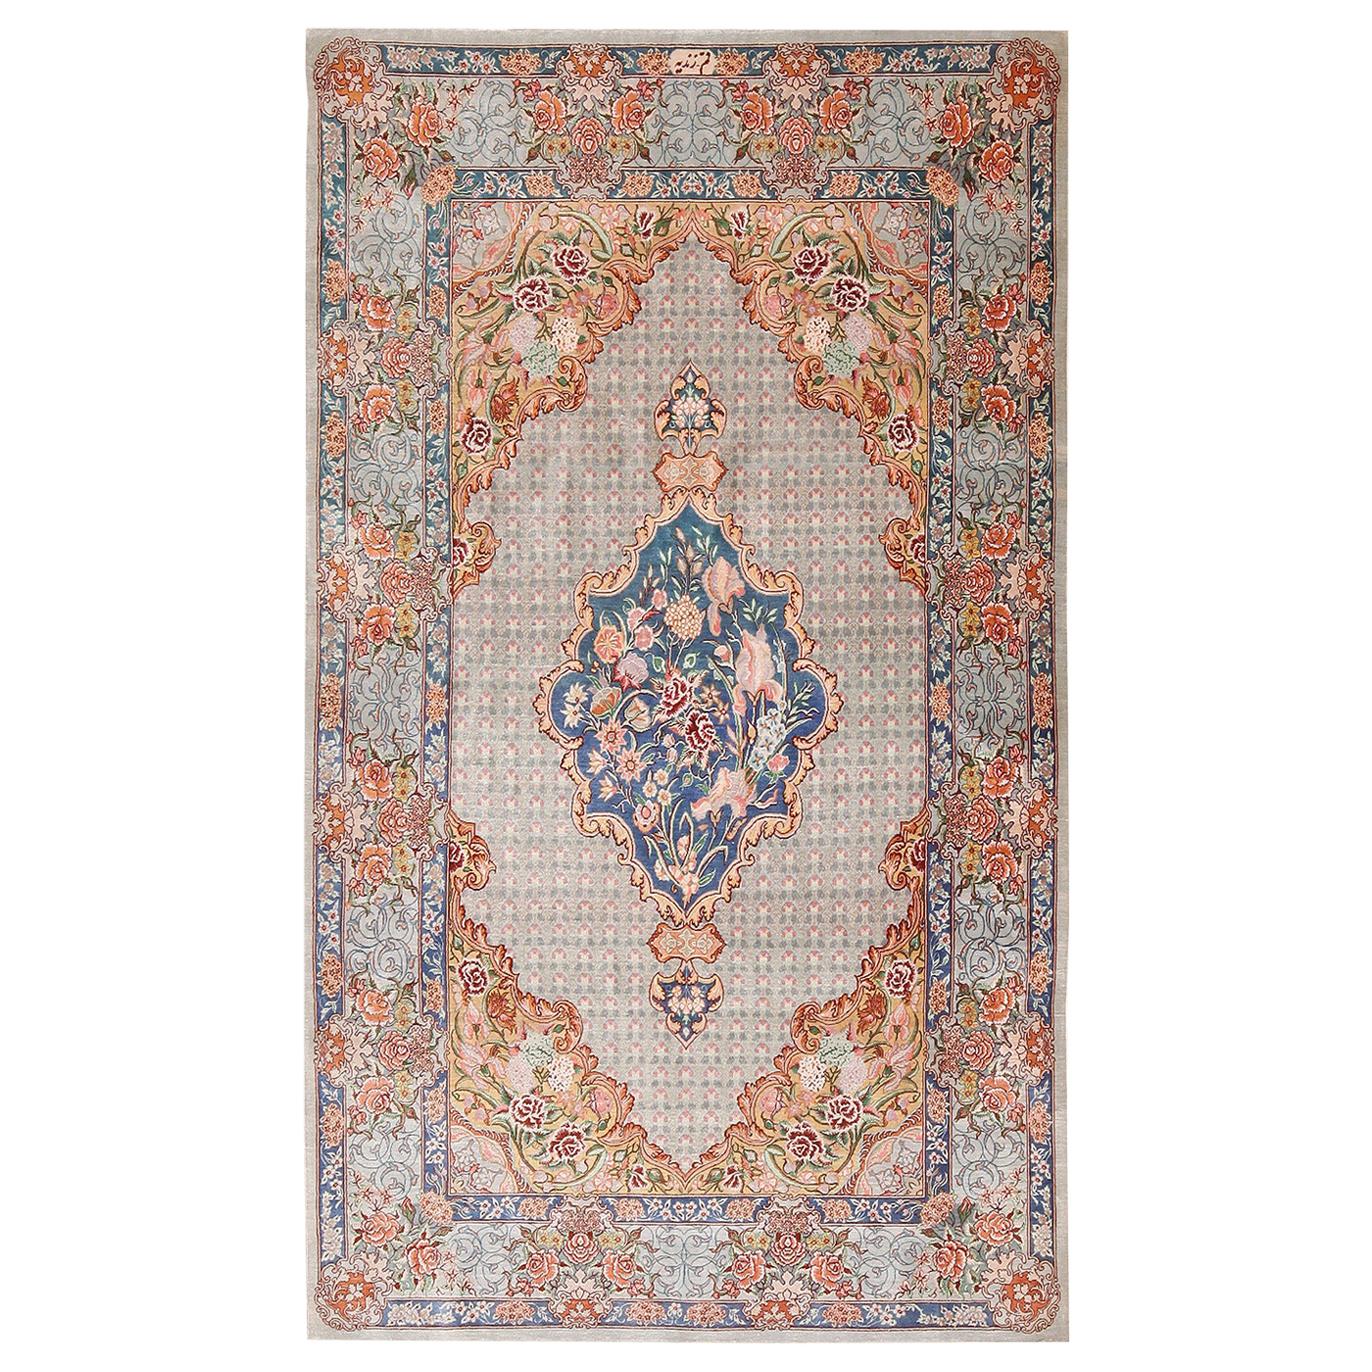 Nazmiyal Collection Vintage Persian Silk Qum Rug. 3 ft 3 in x 5 ft 7 in